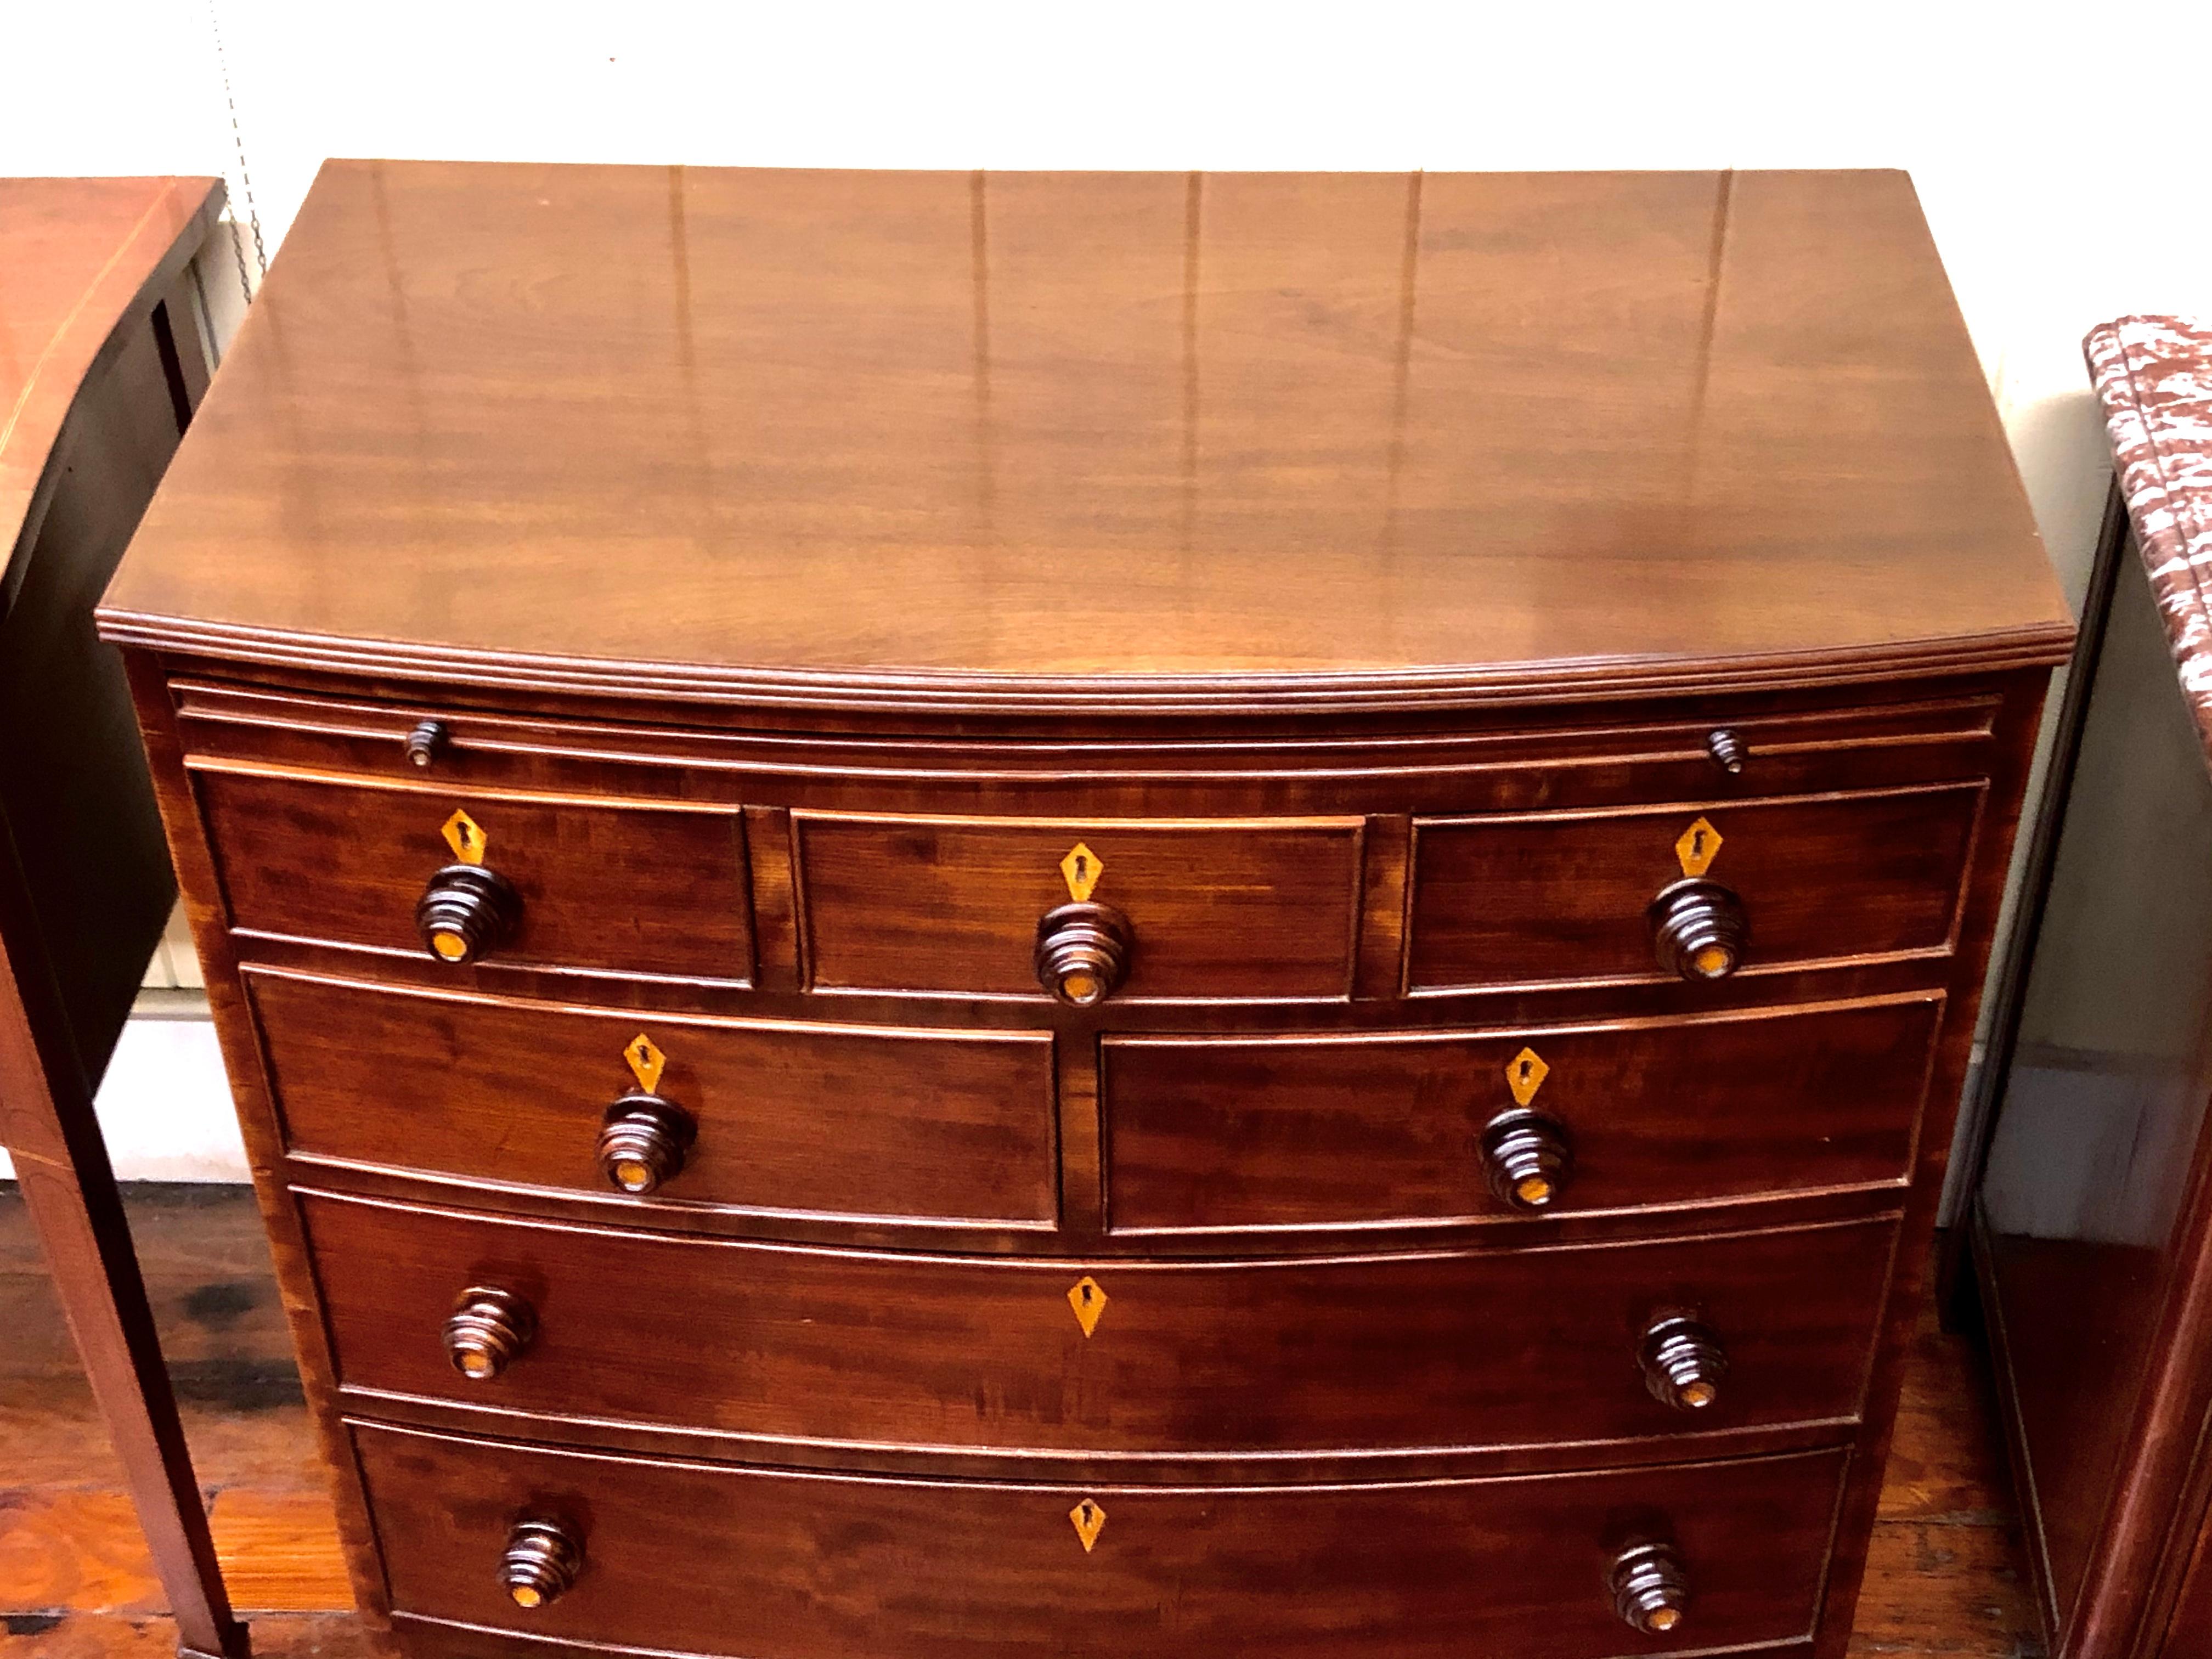 Extraordinary Antique English highly figured bowfront Chest of Drawers with exceptional antique inlaid mahogany round wooden knobs (satinwood inlay in the center). Also has handsome inlaid diamond-shape escutcheons. The chest has a rare pull-out